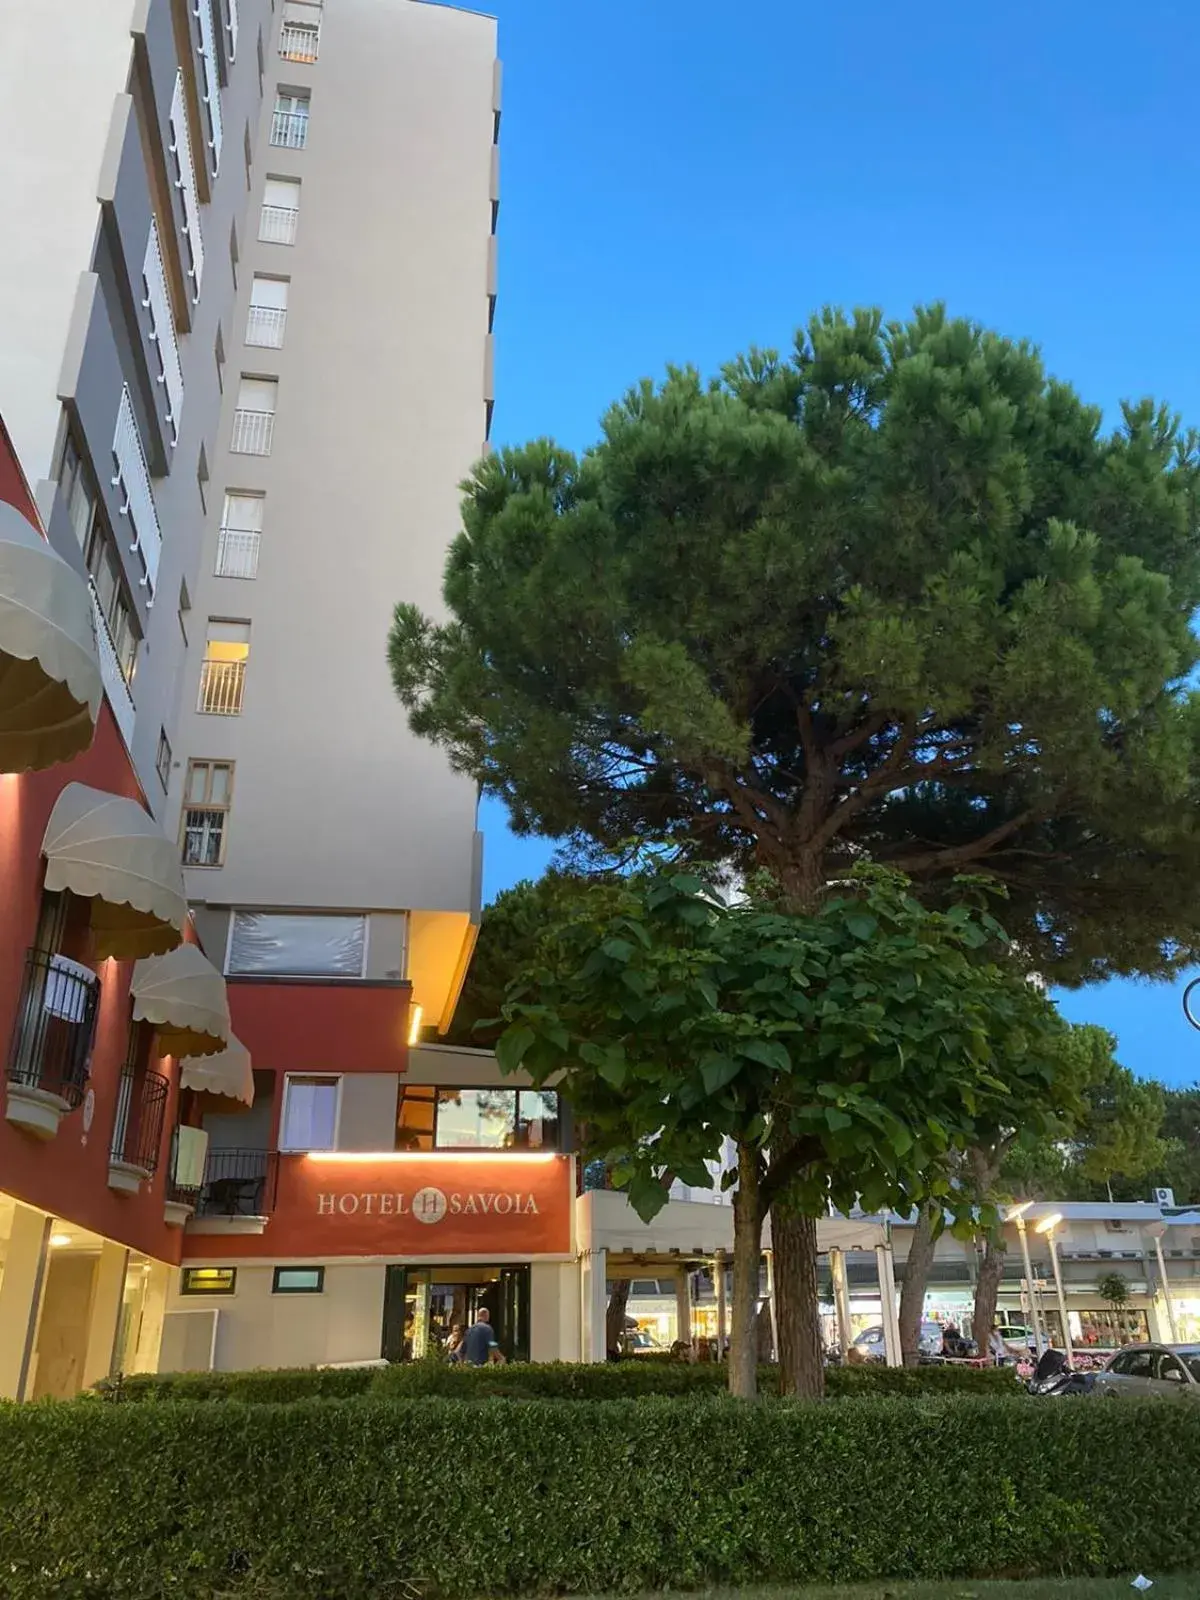 Property building in Hotel Savoia